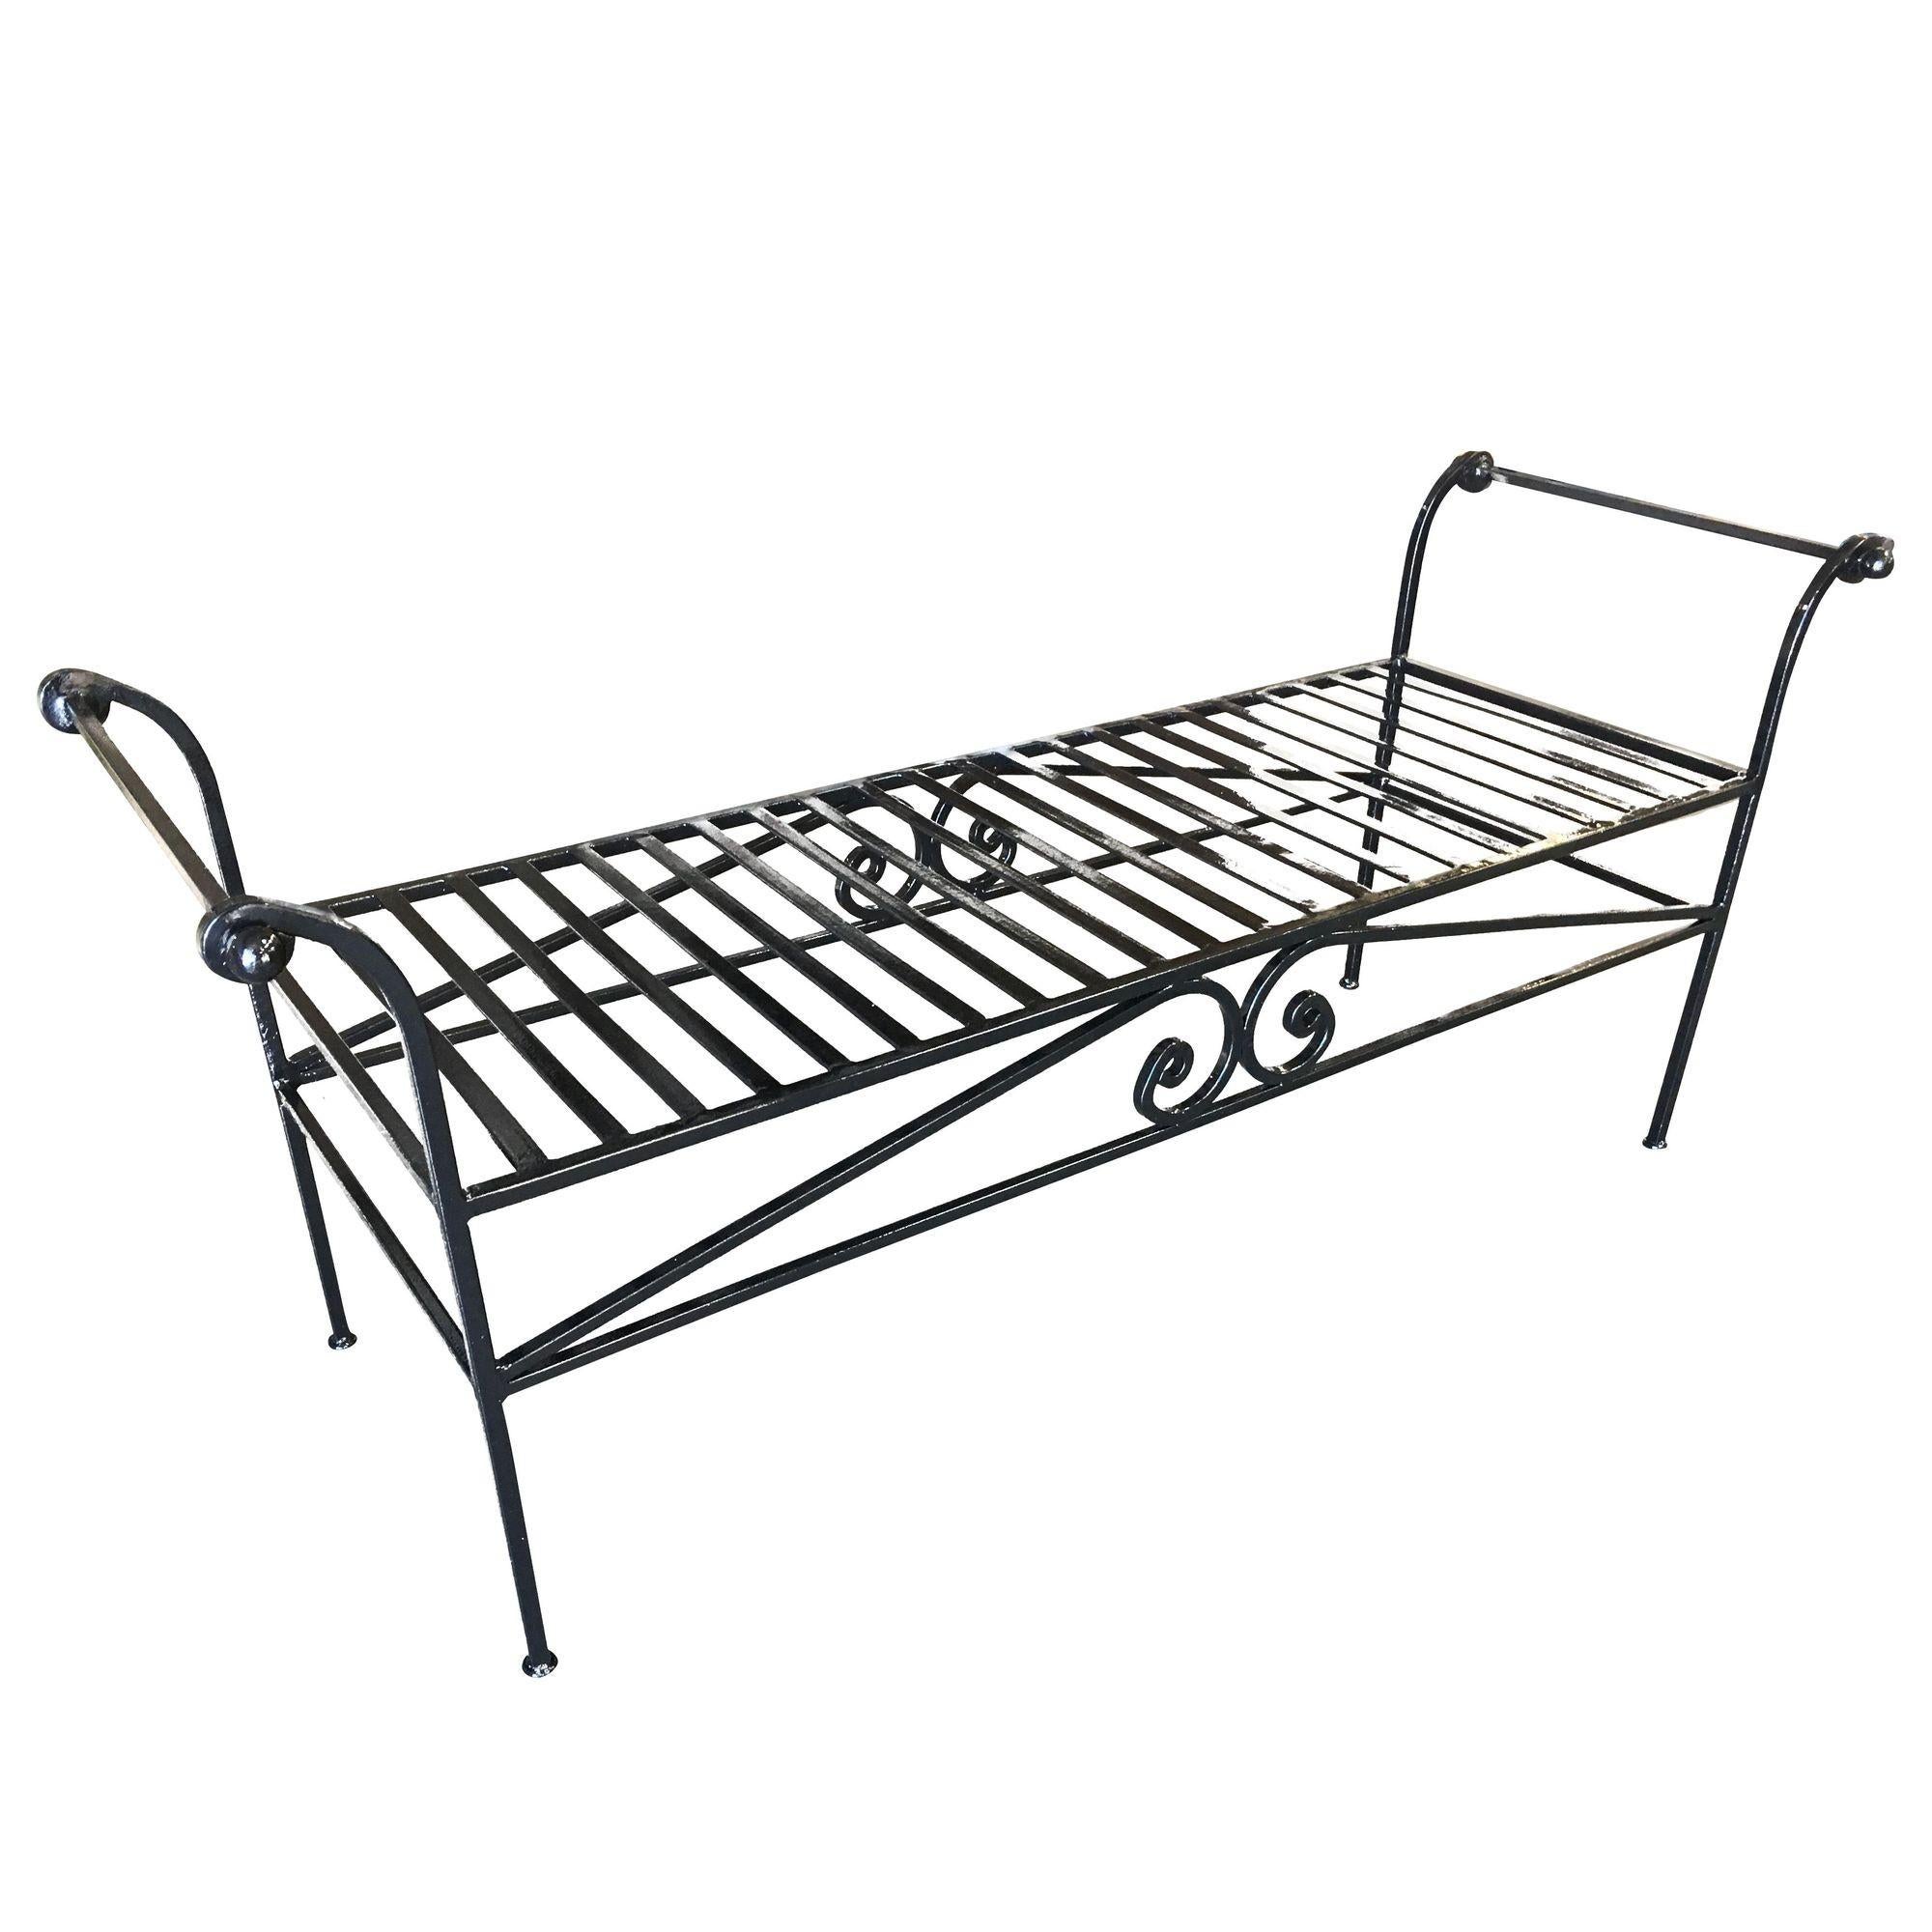 Scrolling Black Wrought Iron Chaise Lounge, Bench